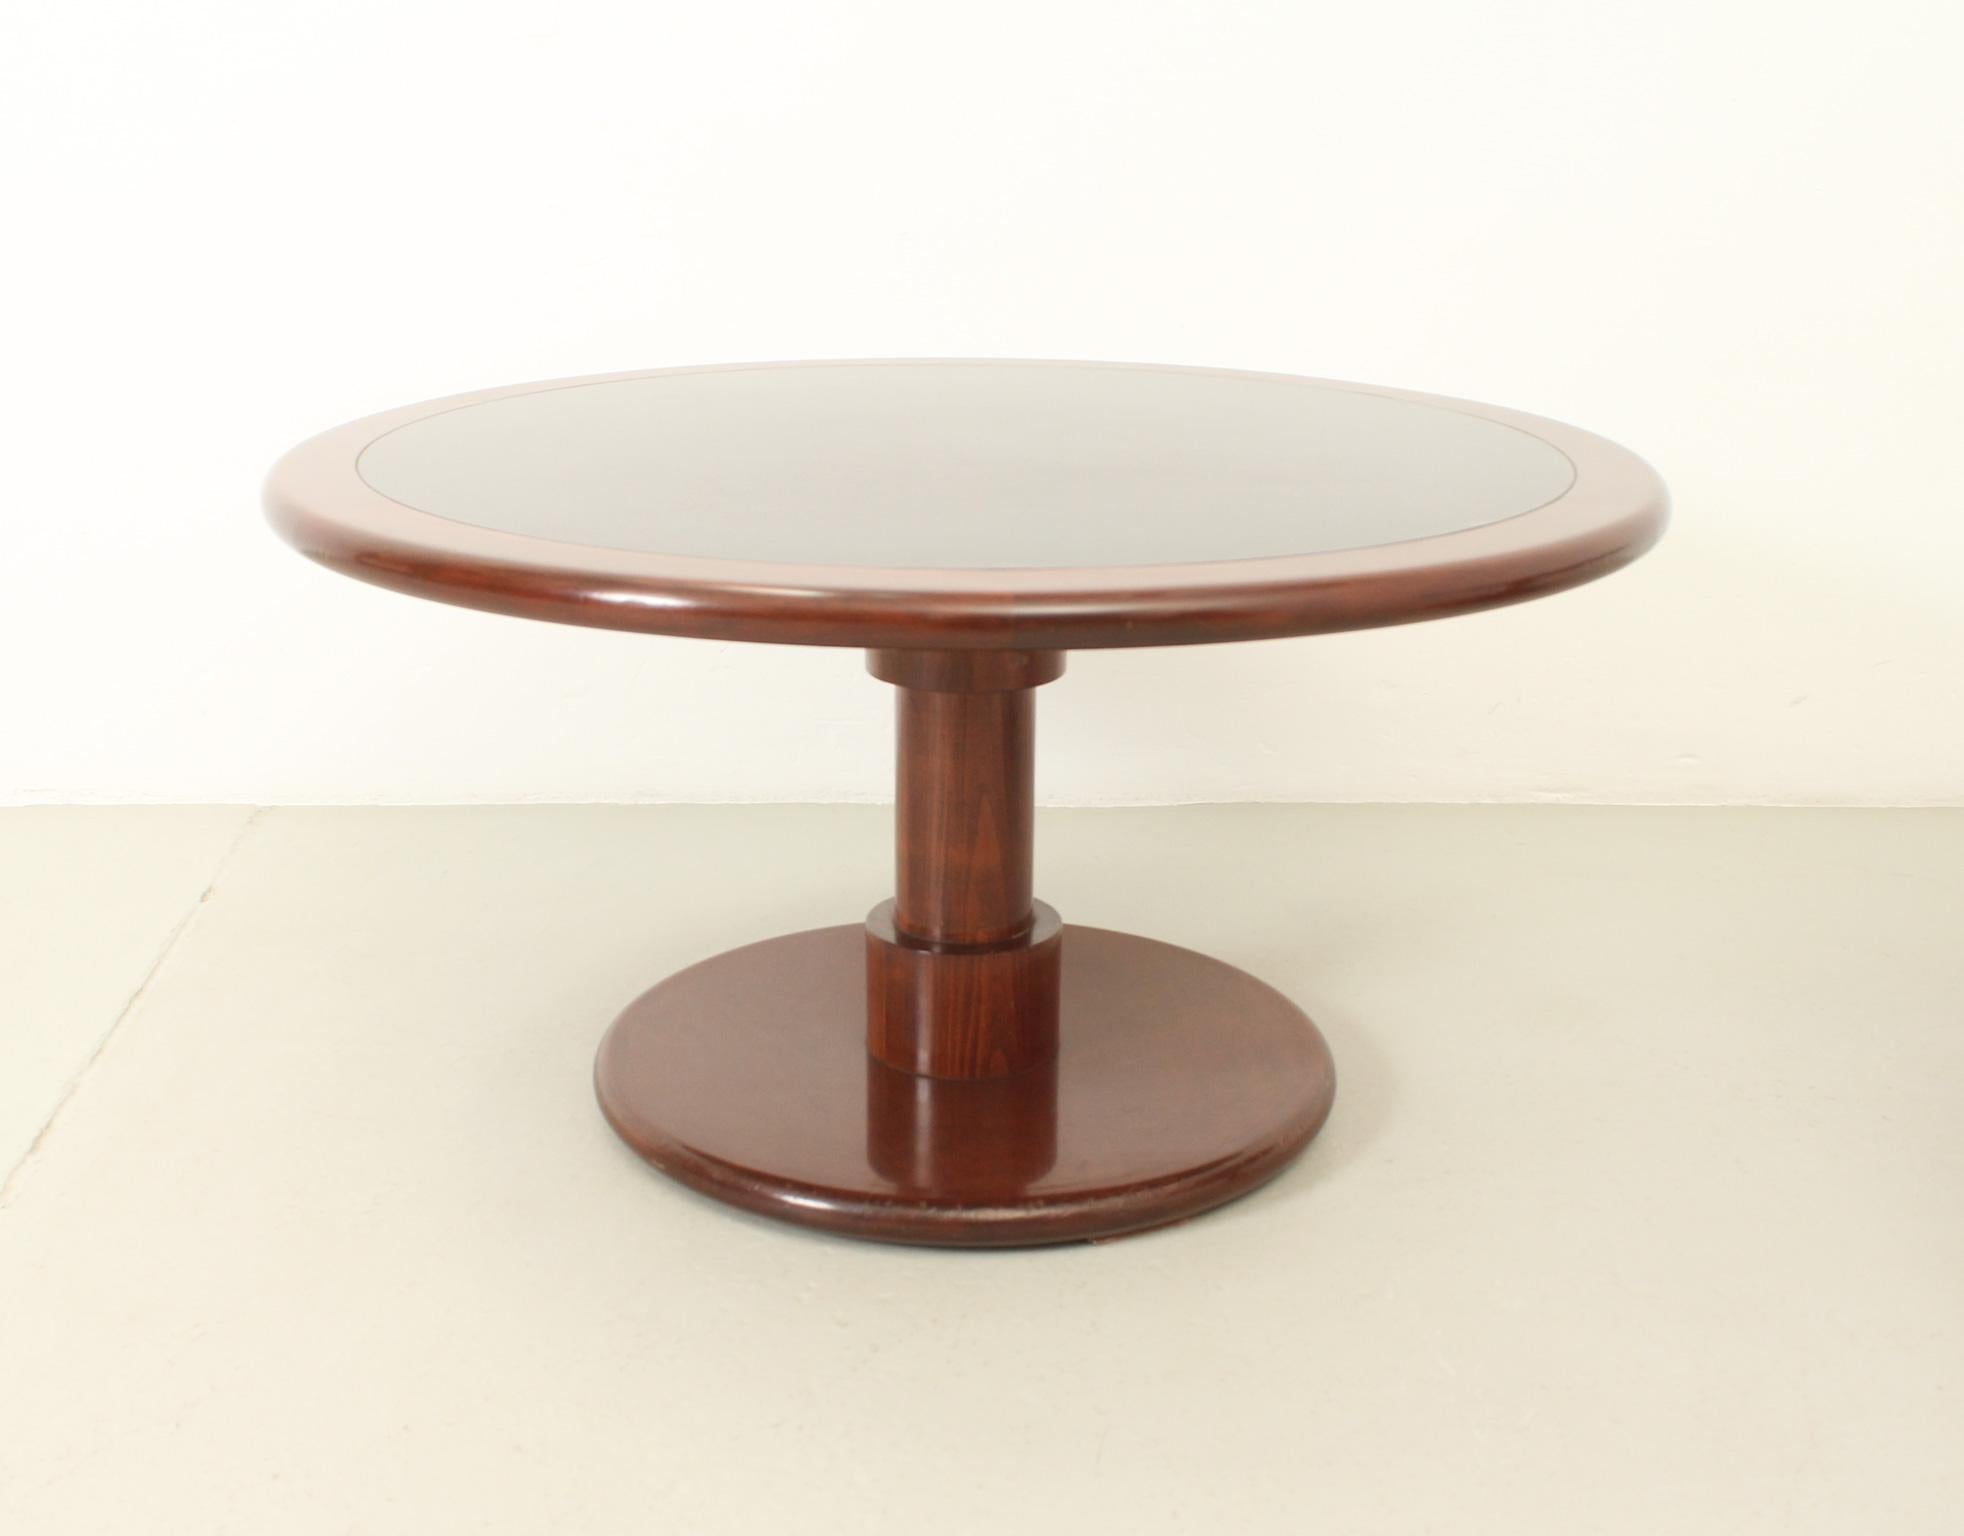 Mid-20th Century Pair of Coffee or Side Tables by Spanish Architects Correa & Milá, 1960's For Sale